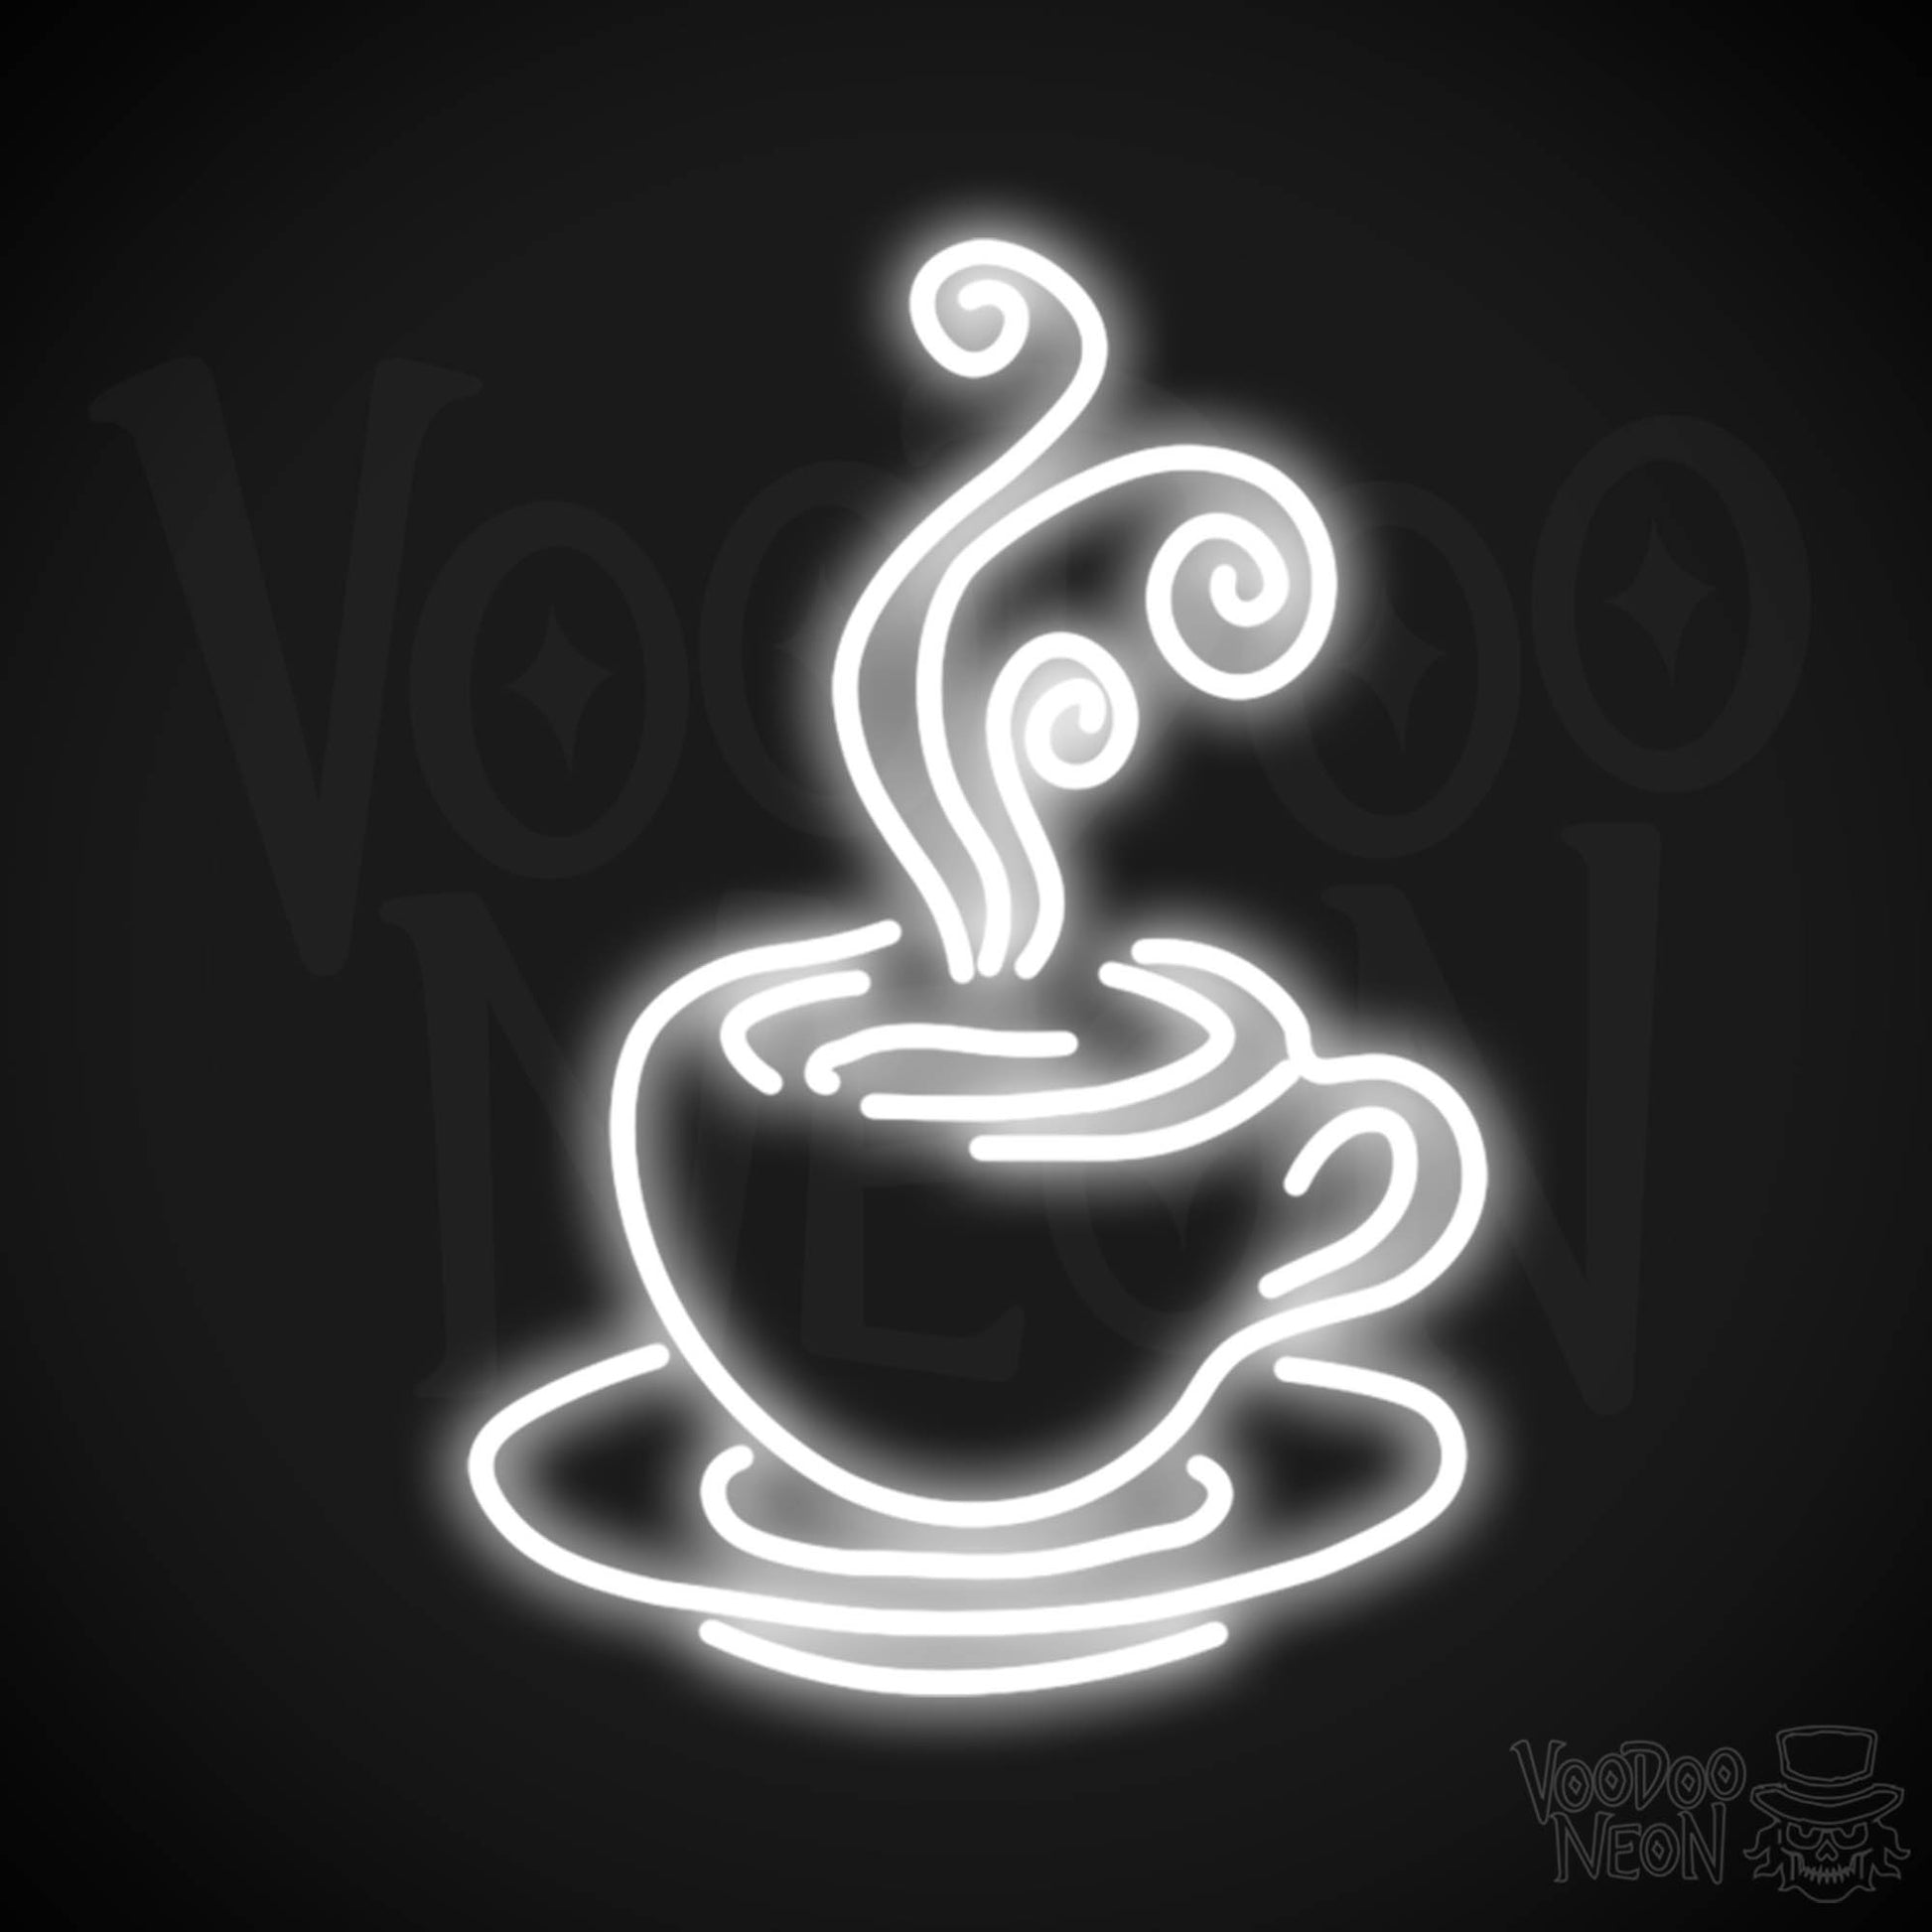 Steaming Coffee Cup Neon Sign - Coffee Cup Sign - Neon Coffee Cup Wall Art - Color White